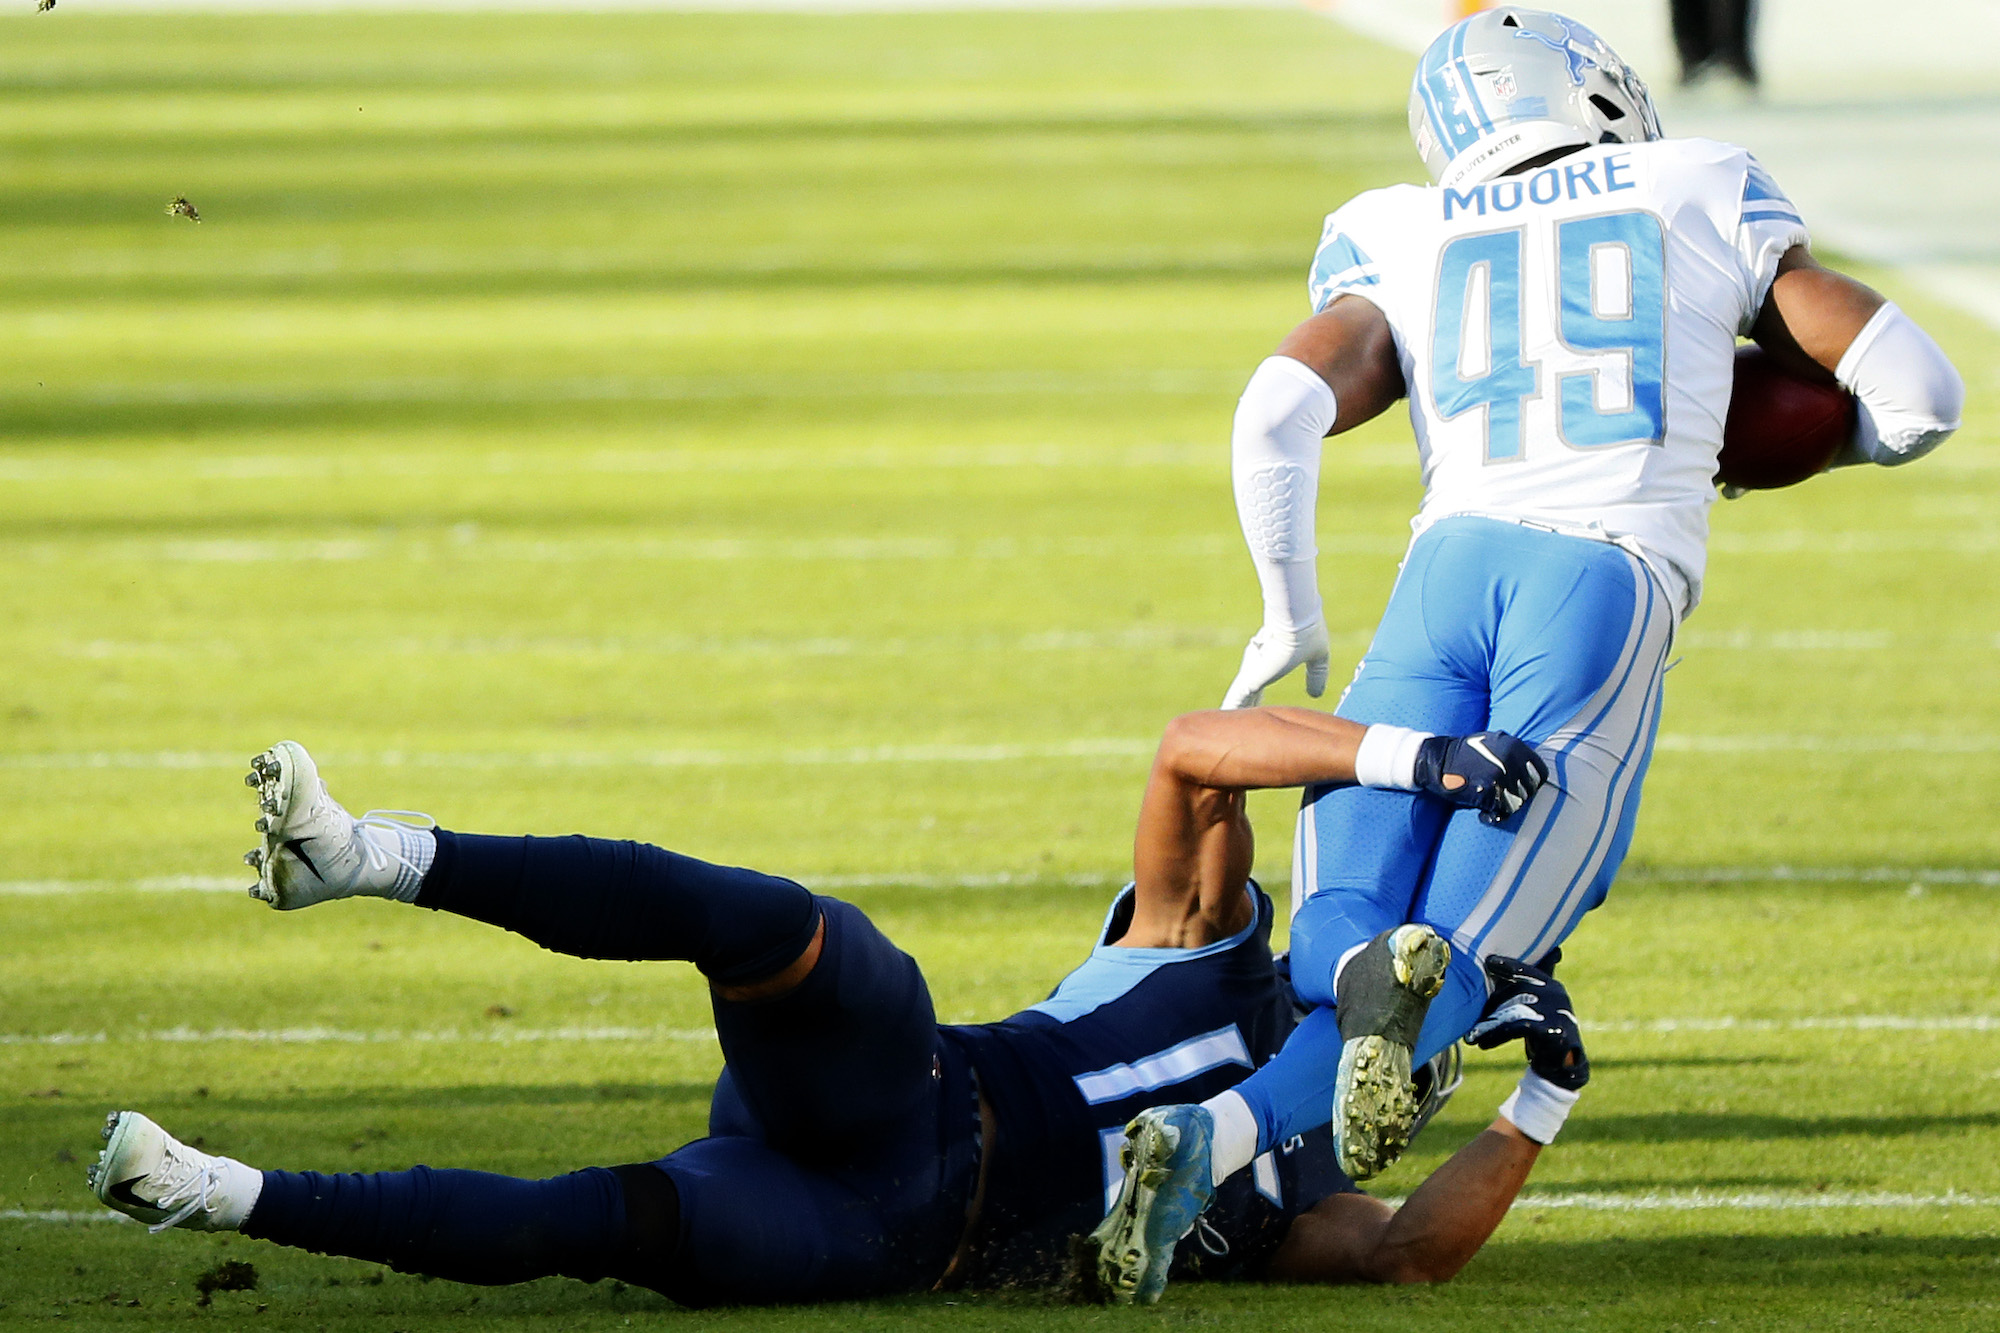 NASHVILLE, TENNESSEE - DECEMBER 20: C.J. Moore #49 of the Detroit Lions is tackled short of a first down by Nick Westbrook #15 of the Tennessee Titans for a turnover on downs on a fake punt during the fourth quarter of the game at Nissan Stadium on December 20, 2020 in Nashville, Tennessee. (Photo by Frederick Breedon/Getty Images)